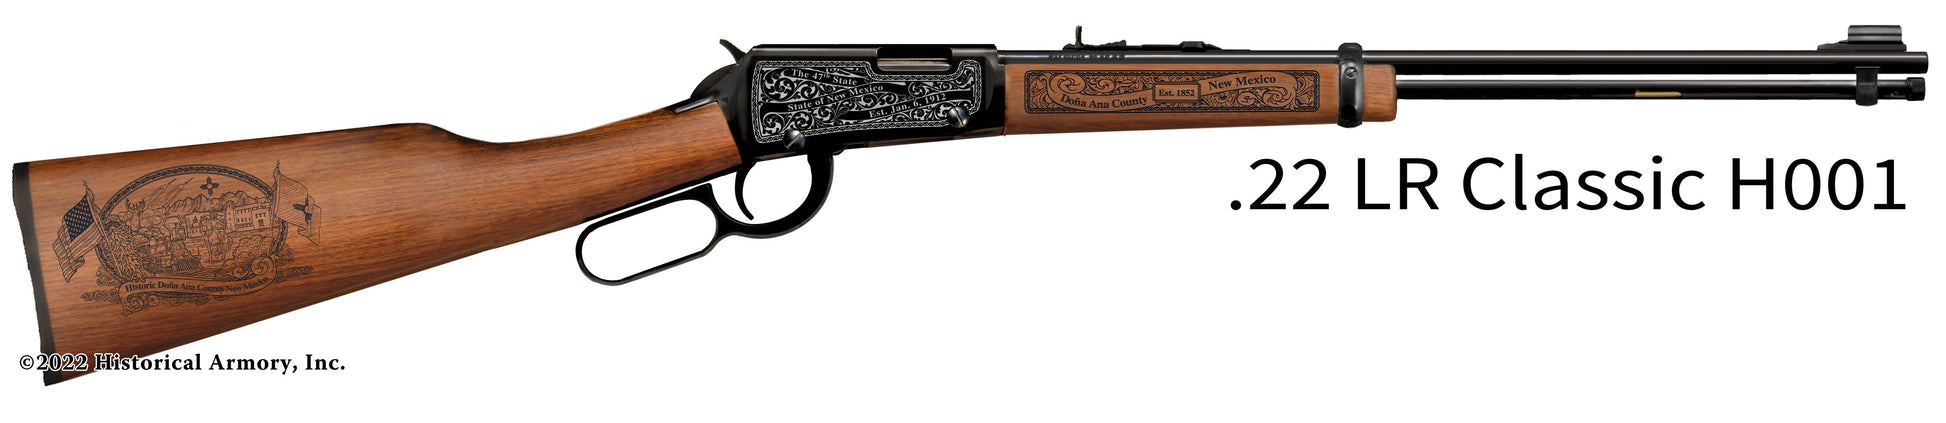 Doña Ana County New Mexico Engraved Henry H001 Rifle